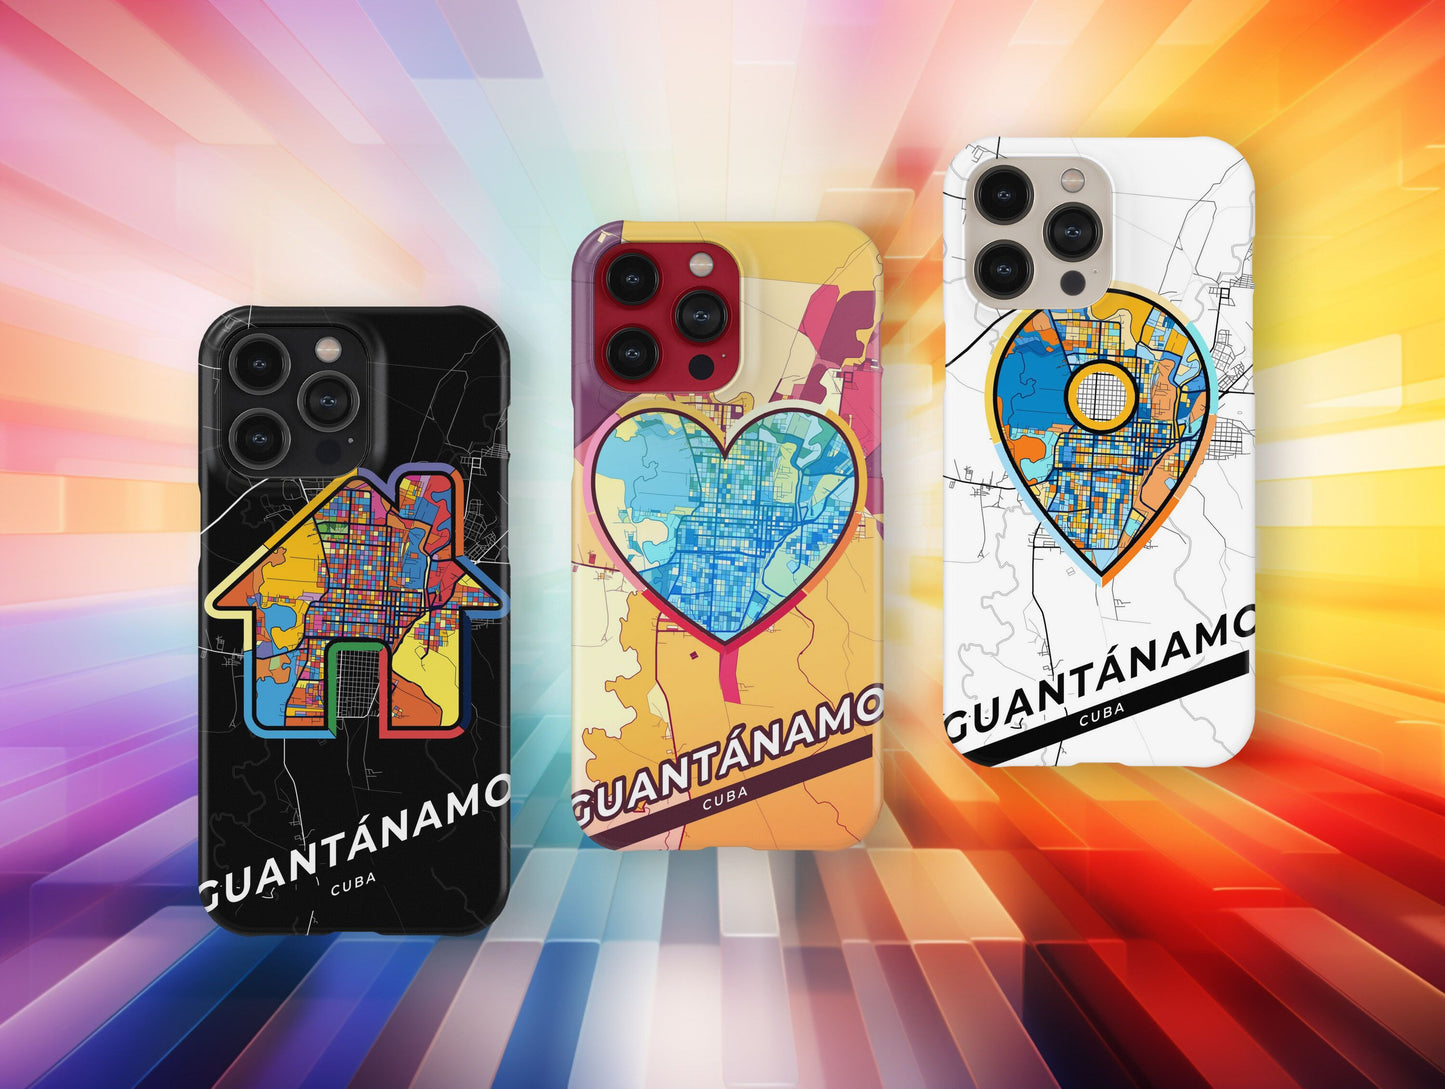 Guantánamo Cuba slim phone case with colorful icon. Birthday, wedding or housewarming gift. Couple match cases.